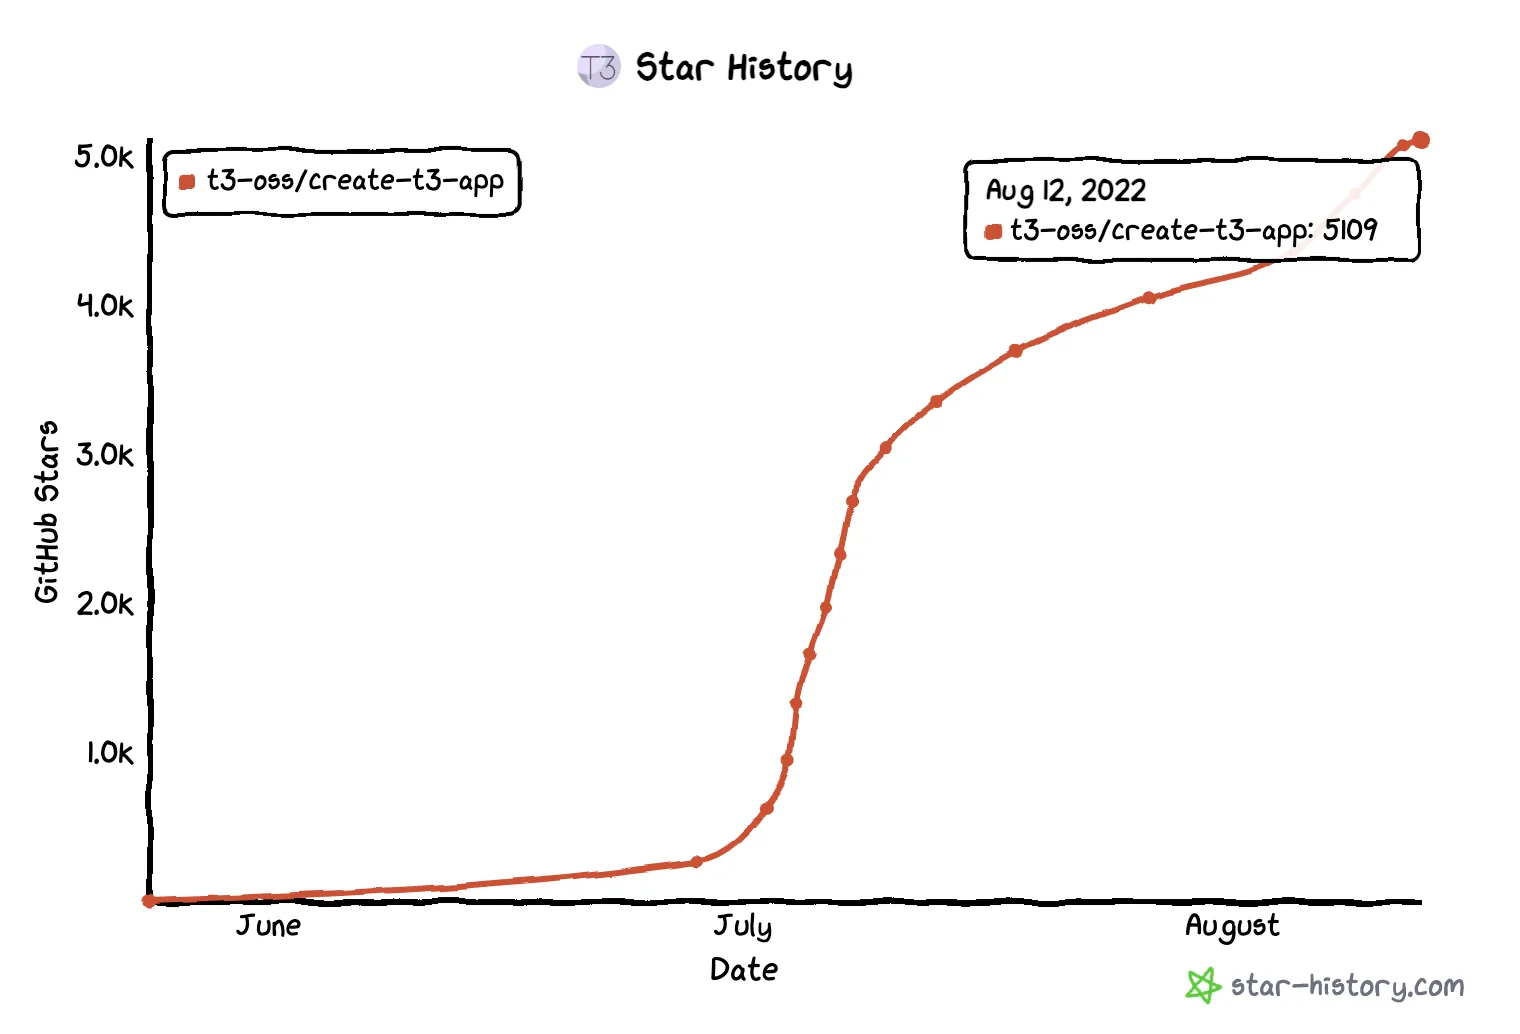 05 - create-t3-app star history chart showing steep growth over the summer of 2022